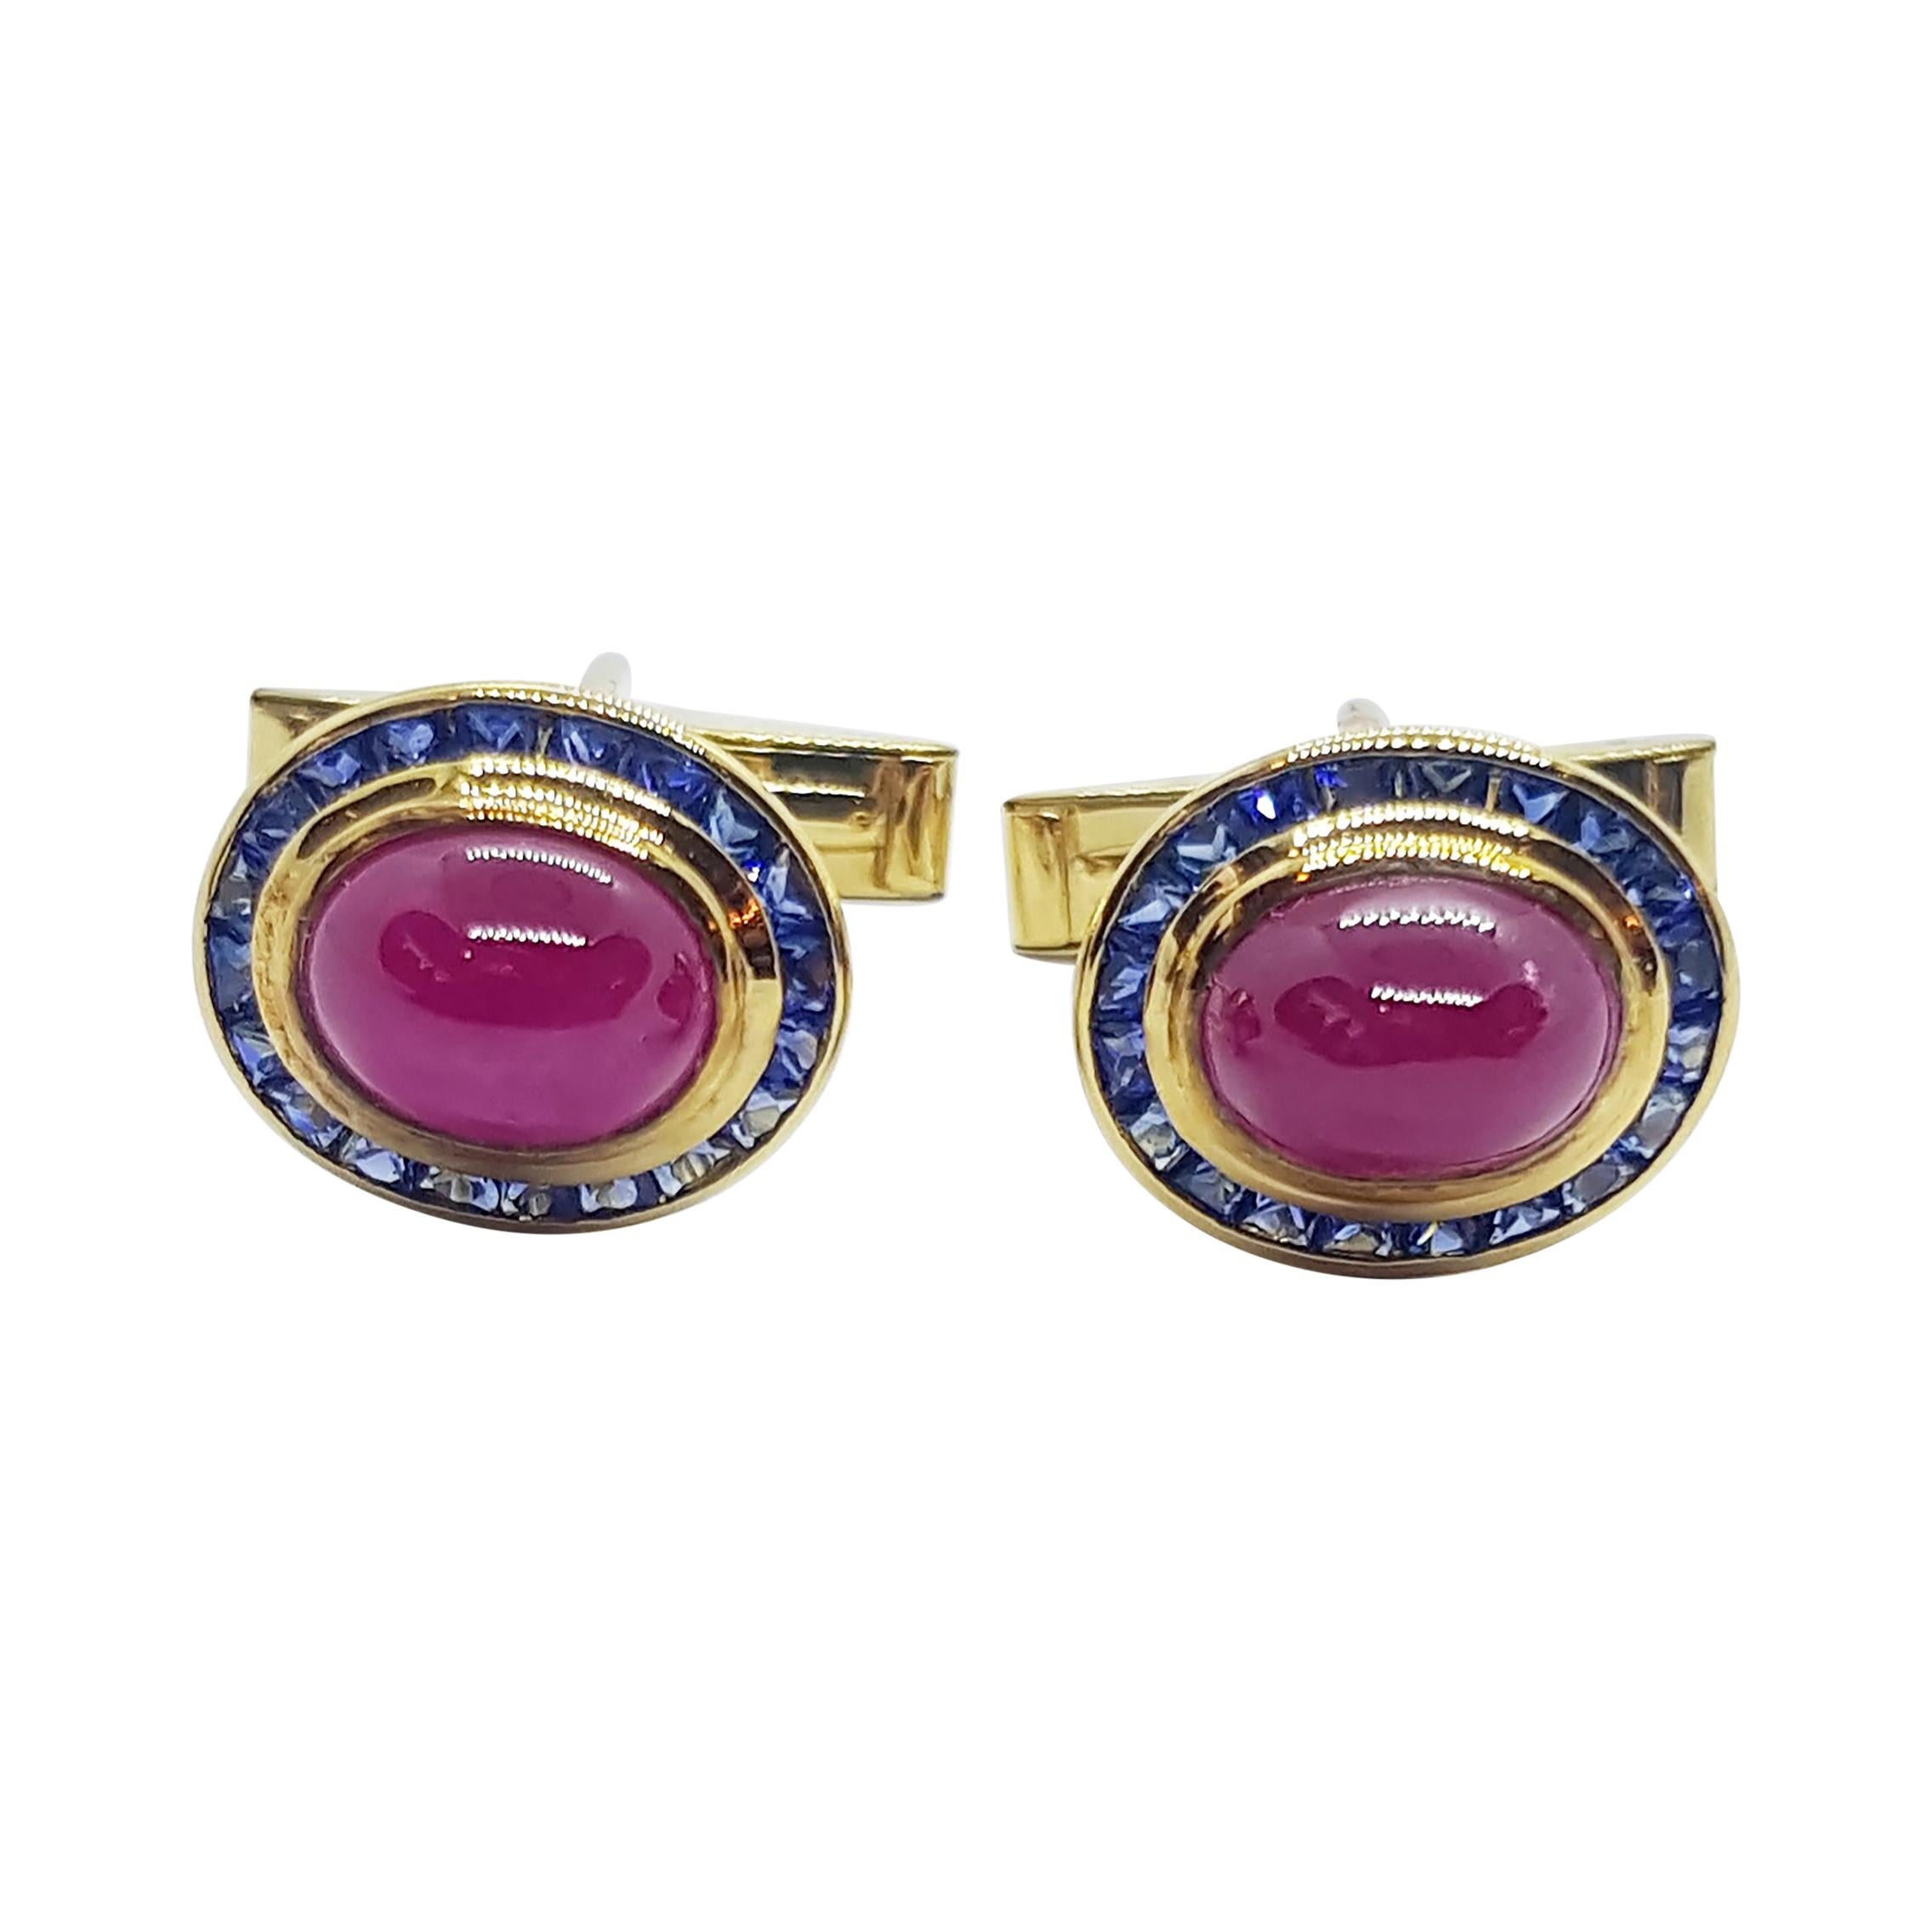 Cabochon Ruby with Blue Sapphire Cufflinks Set in 18 Karat Gold Settings